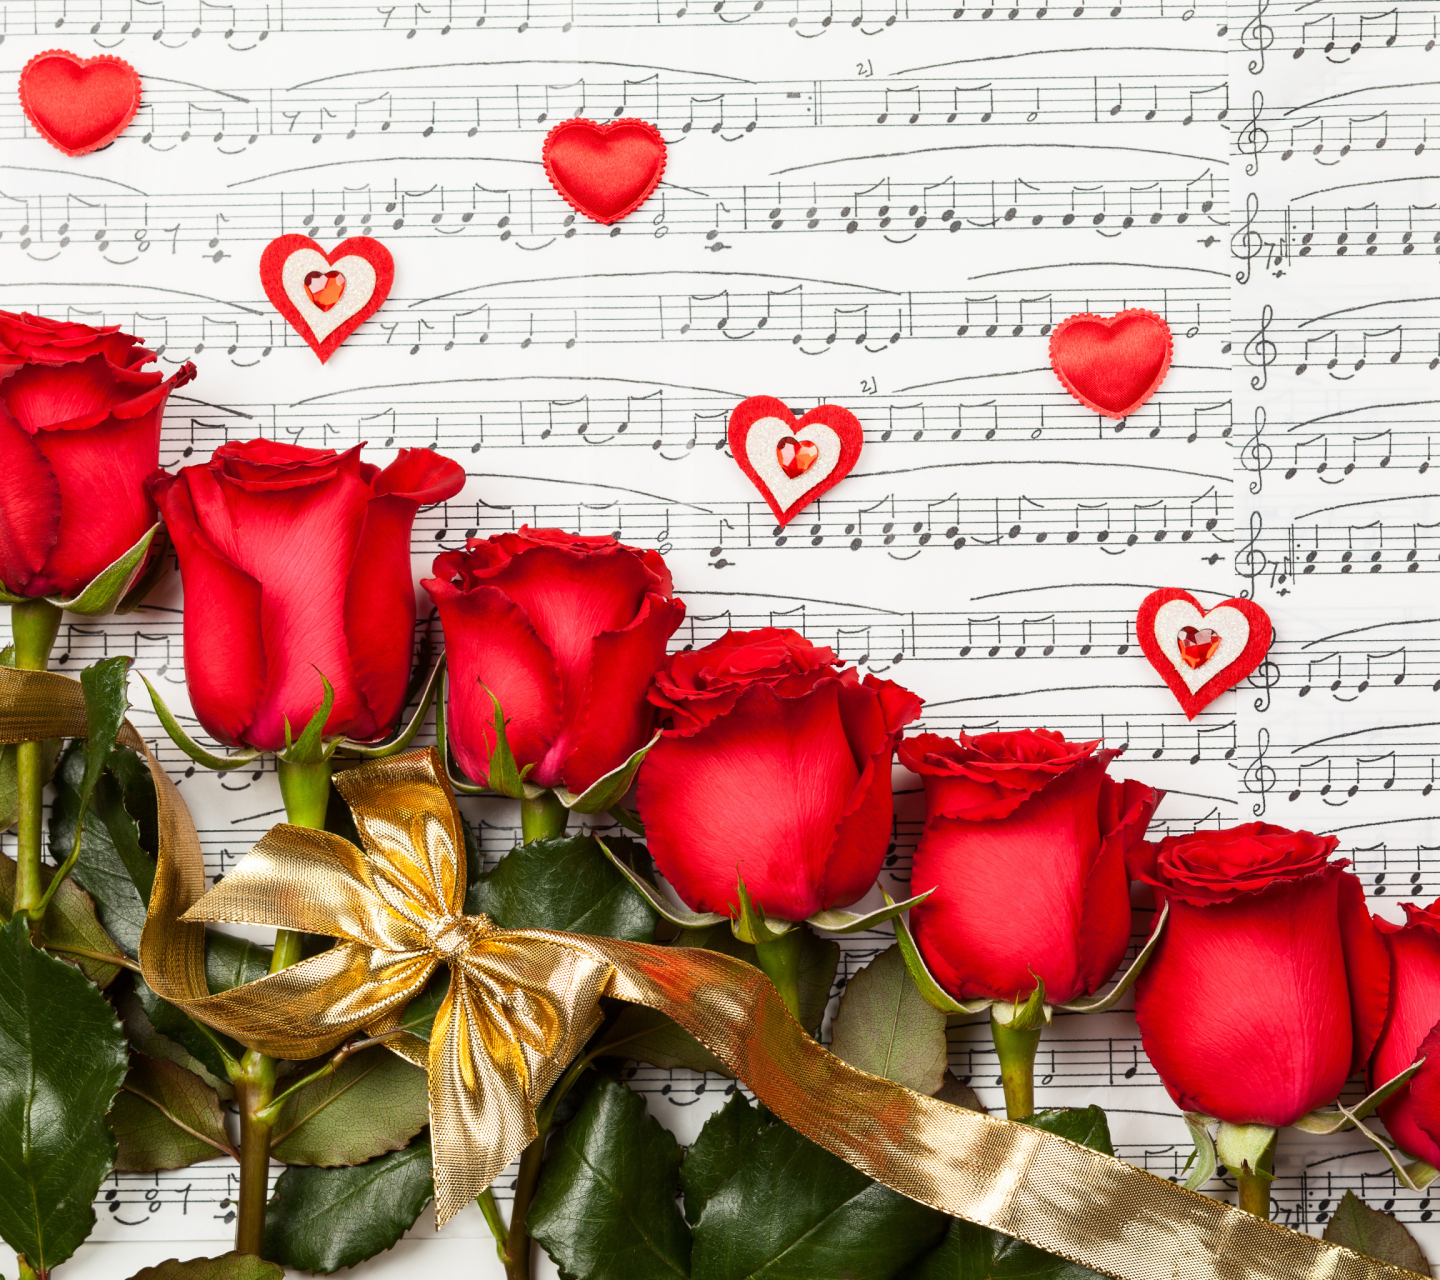 Das Roses, Love And Music Wallpaper 1440x1280